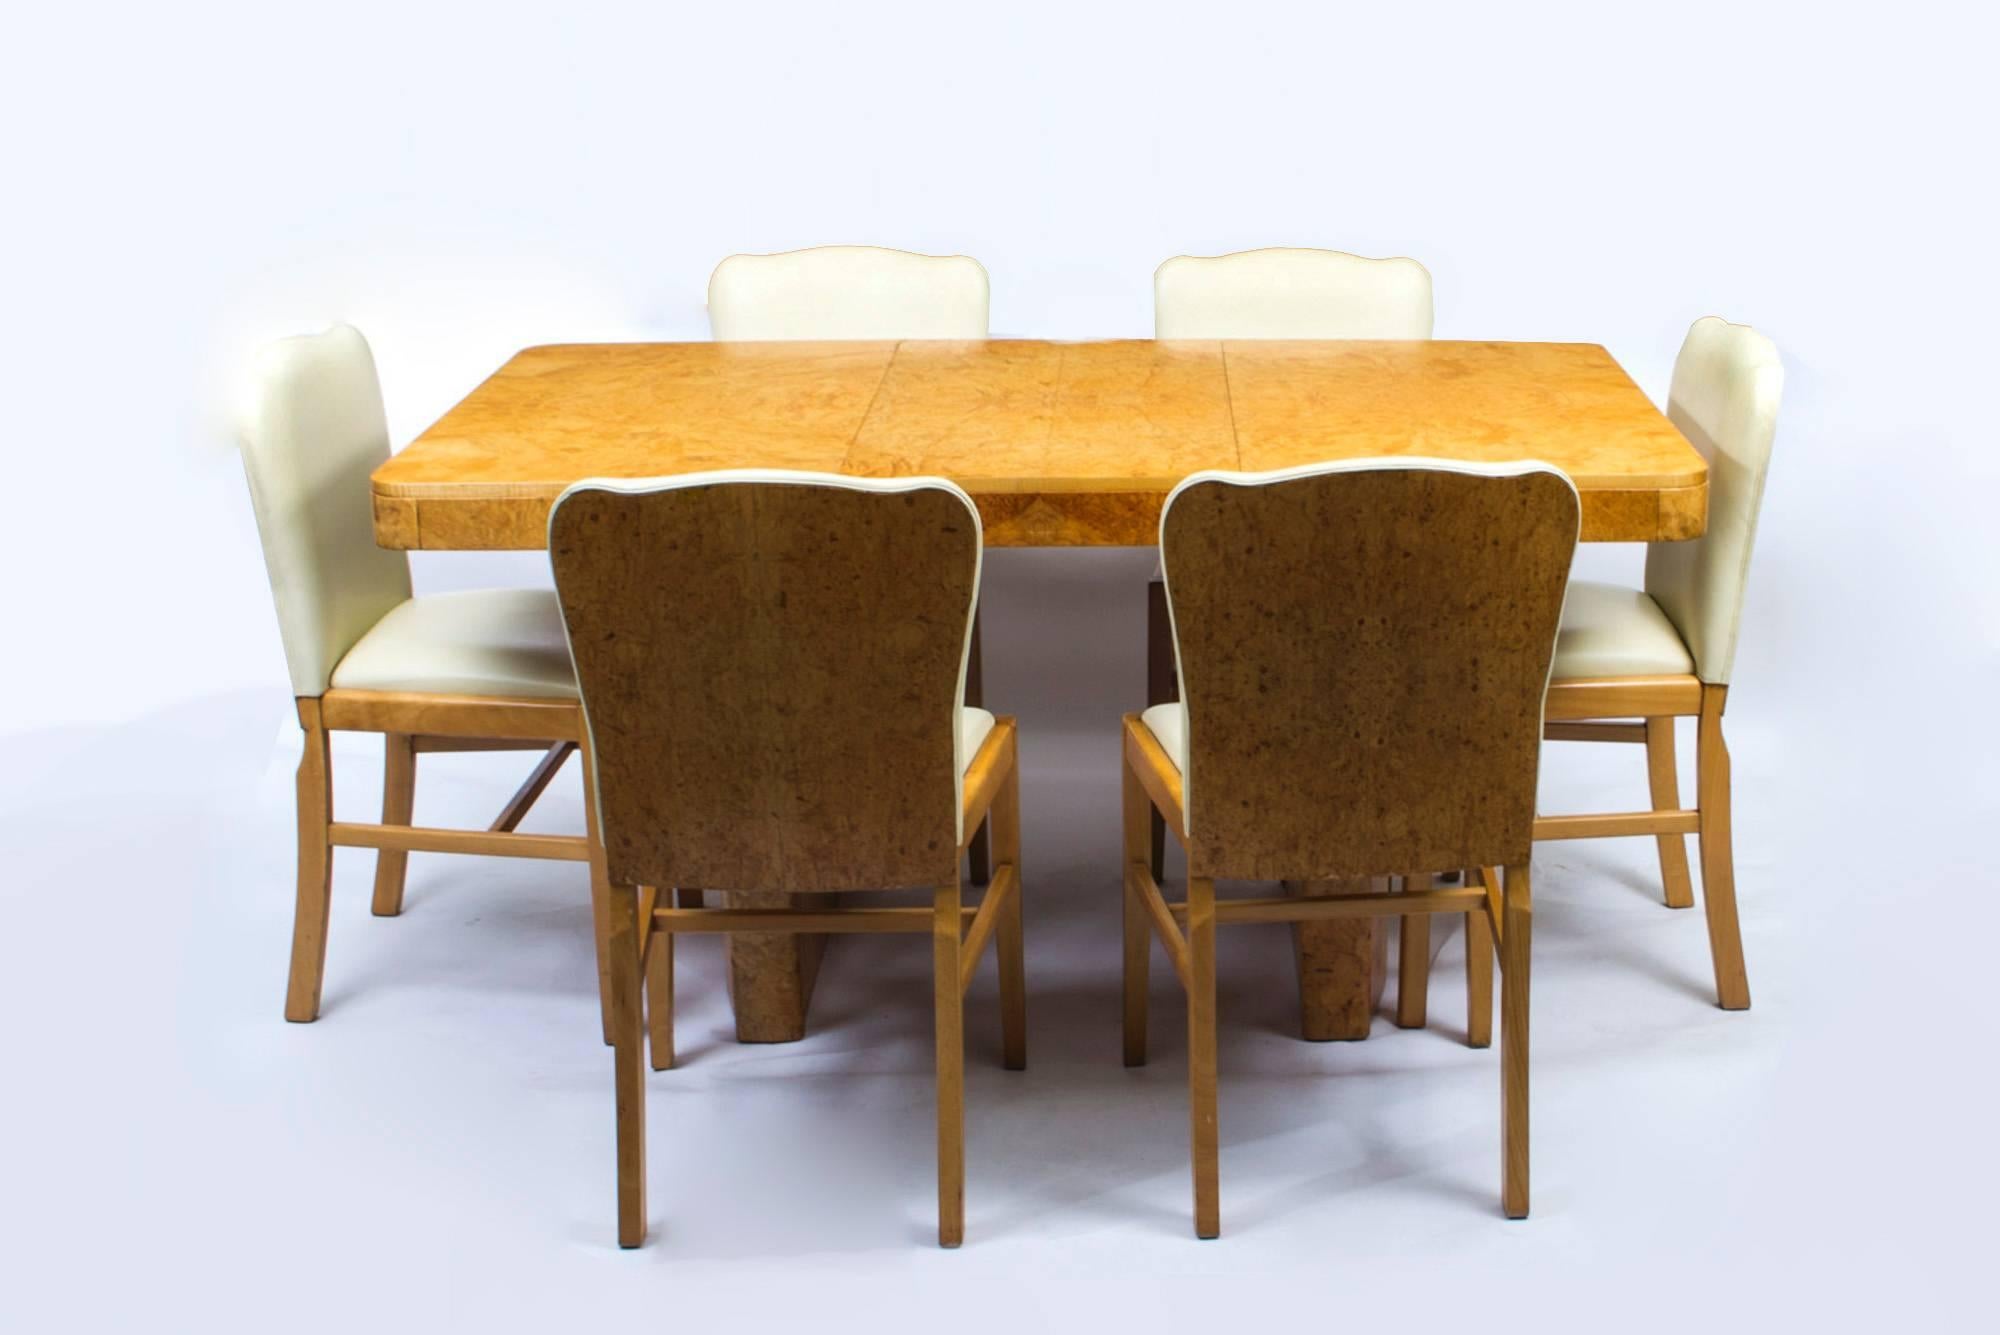 Antique Art Deco Bird's-Eye Maple Dining Table and Six Chairs 1